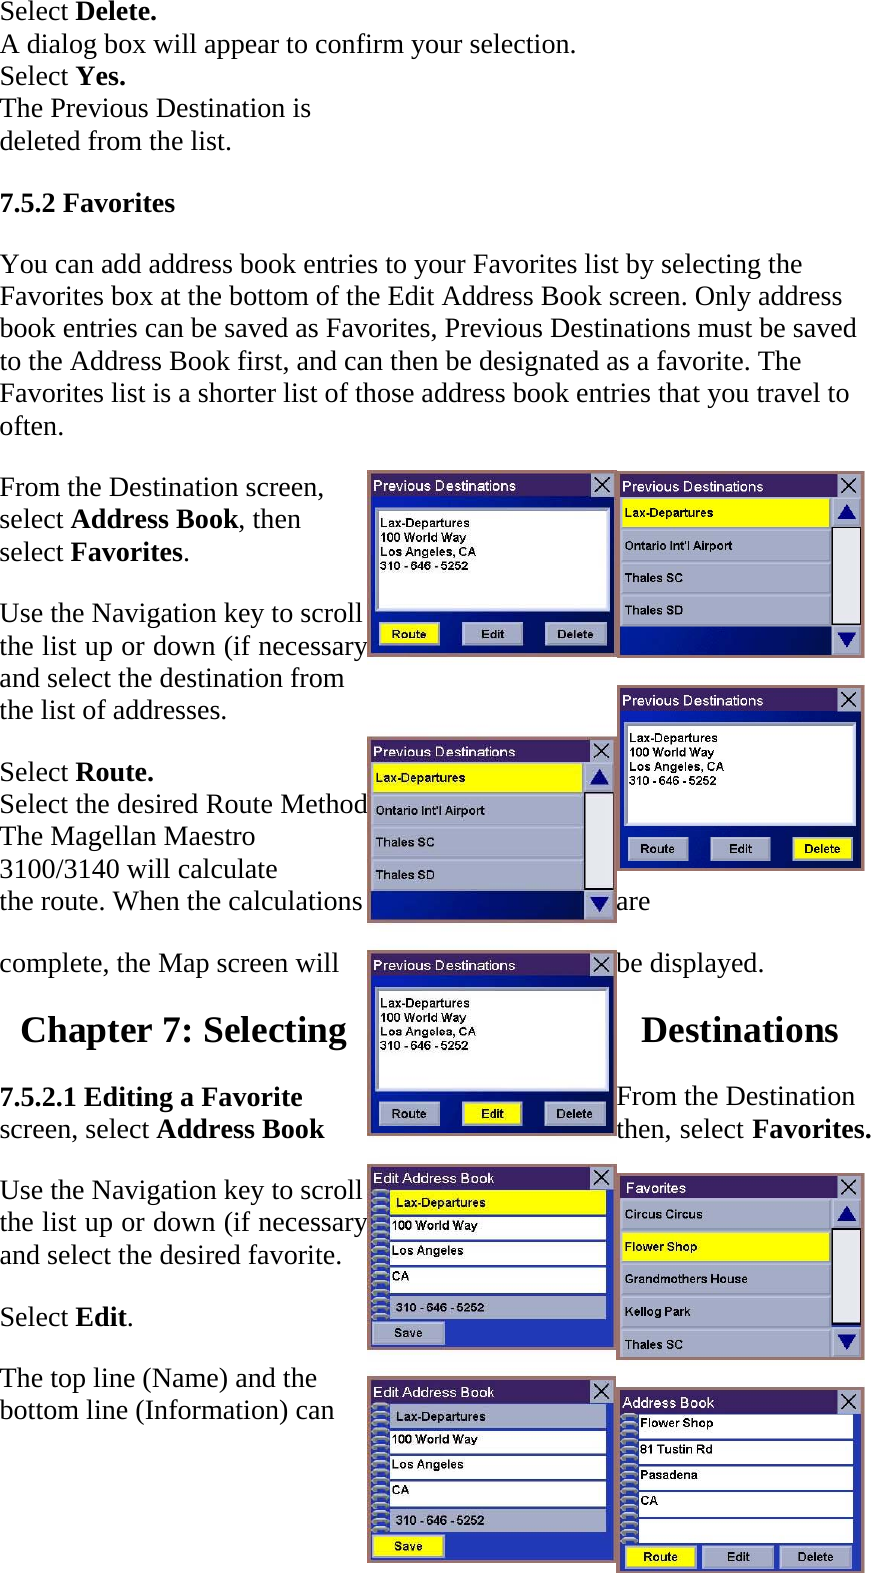 Select Delete.  A dialog box will appear to confirm your selection.  Select Yes.  The Previous Destination is  deleted from the list.  7.5.2 Favorites  You can add address book entries to your Favorites list by selecting the Favorites box at the bottom of the Edit Address Book screen. Only address book entries can be saved as Favorites, Previous Destinations must be saved to the Address Book first, and can then be designated as a favorite. The Favorites list is a shorter list of those address book entries that you travel to often.  From the Destination screen, select Address Book, then select Favorites.  Use the Navigation key to scroll the list up or down (if necessary) and select the destination from the list of addresses.  Select Route.  Select the desired Route Method.  The Magellan Maestro 3100/3140 will calculate  the route. When the calculations  are  complete, the Map screen will  be displayed. Chapter 7: Selecting  Destinations  7.5.2.1 Editing a Favorite  From the Destination screen, select Address Book  then, select Favorites.  Use the Navigation key to scroll the list up or down (if necessary) and select the desired favorite.  Select Edit.  The top line (Name) and the bottom line (Information) can 